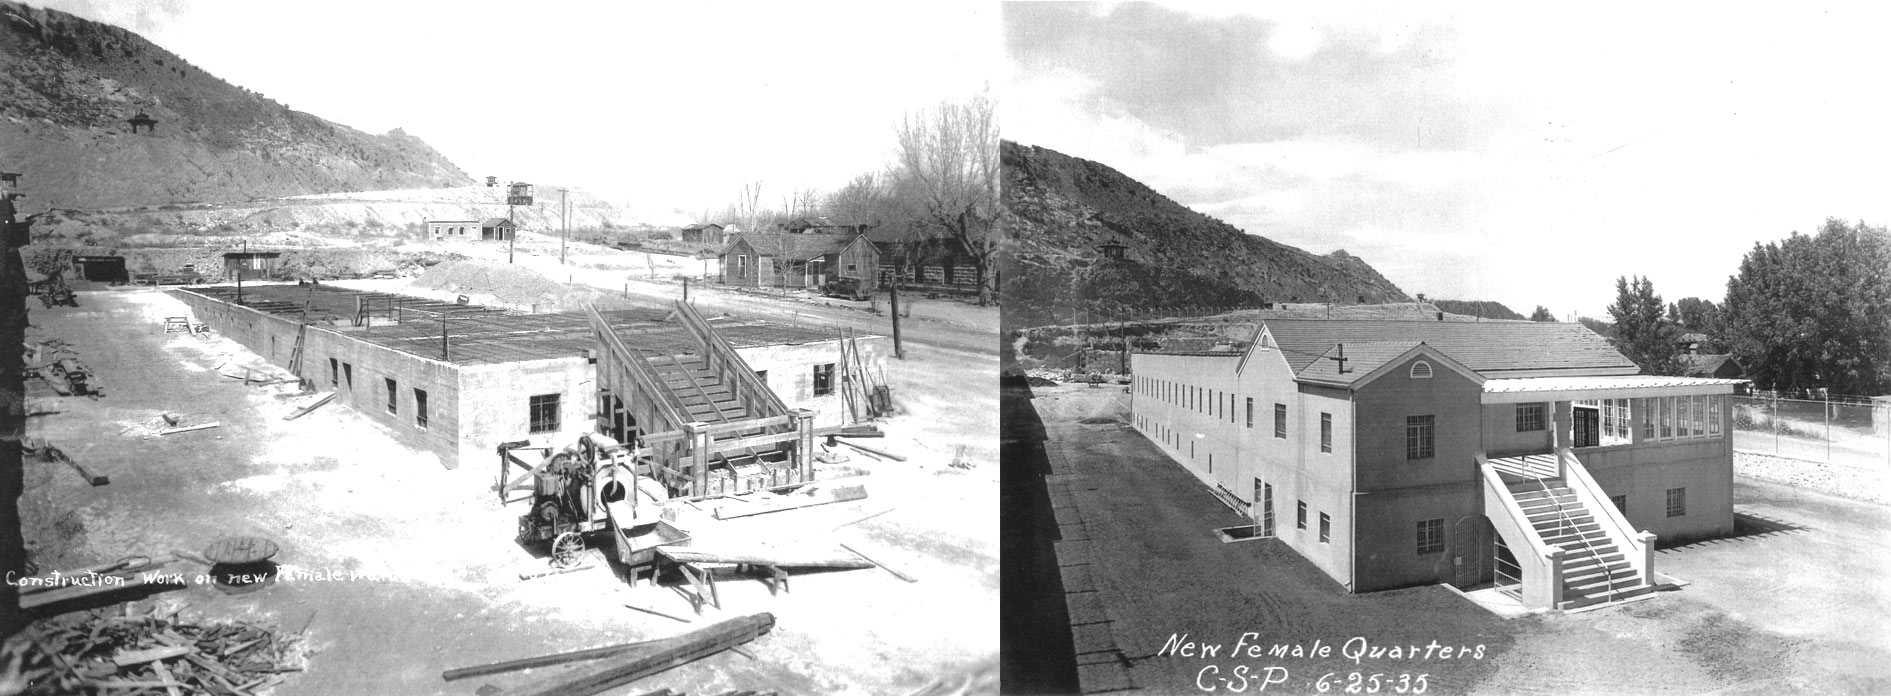 (Left) Construction of the women's ward, March 1934. (Right) The completed building.